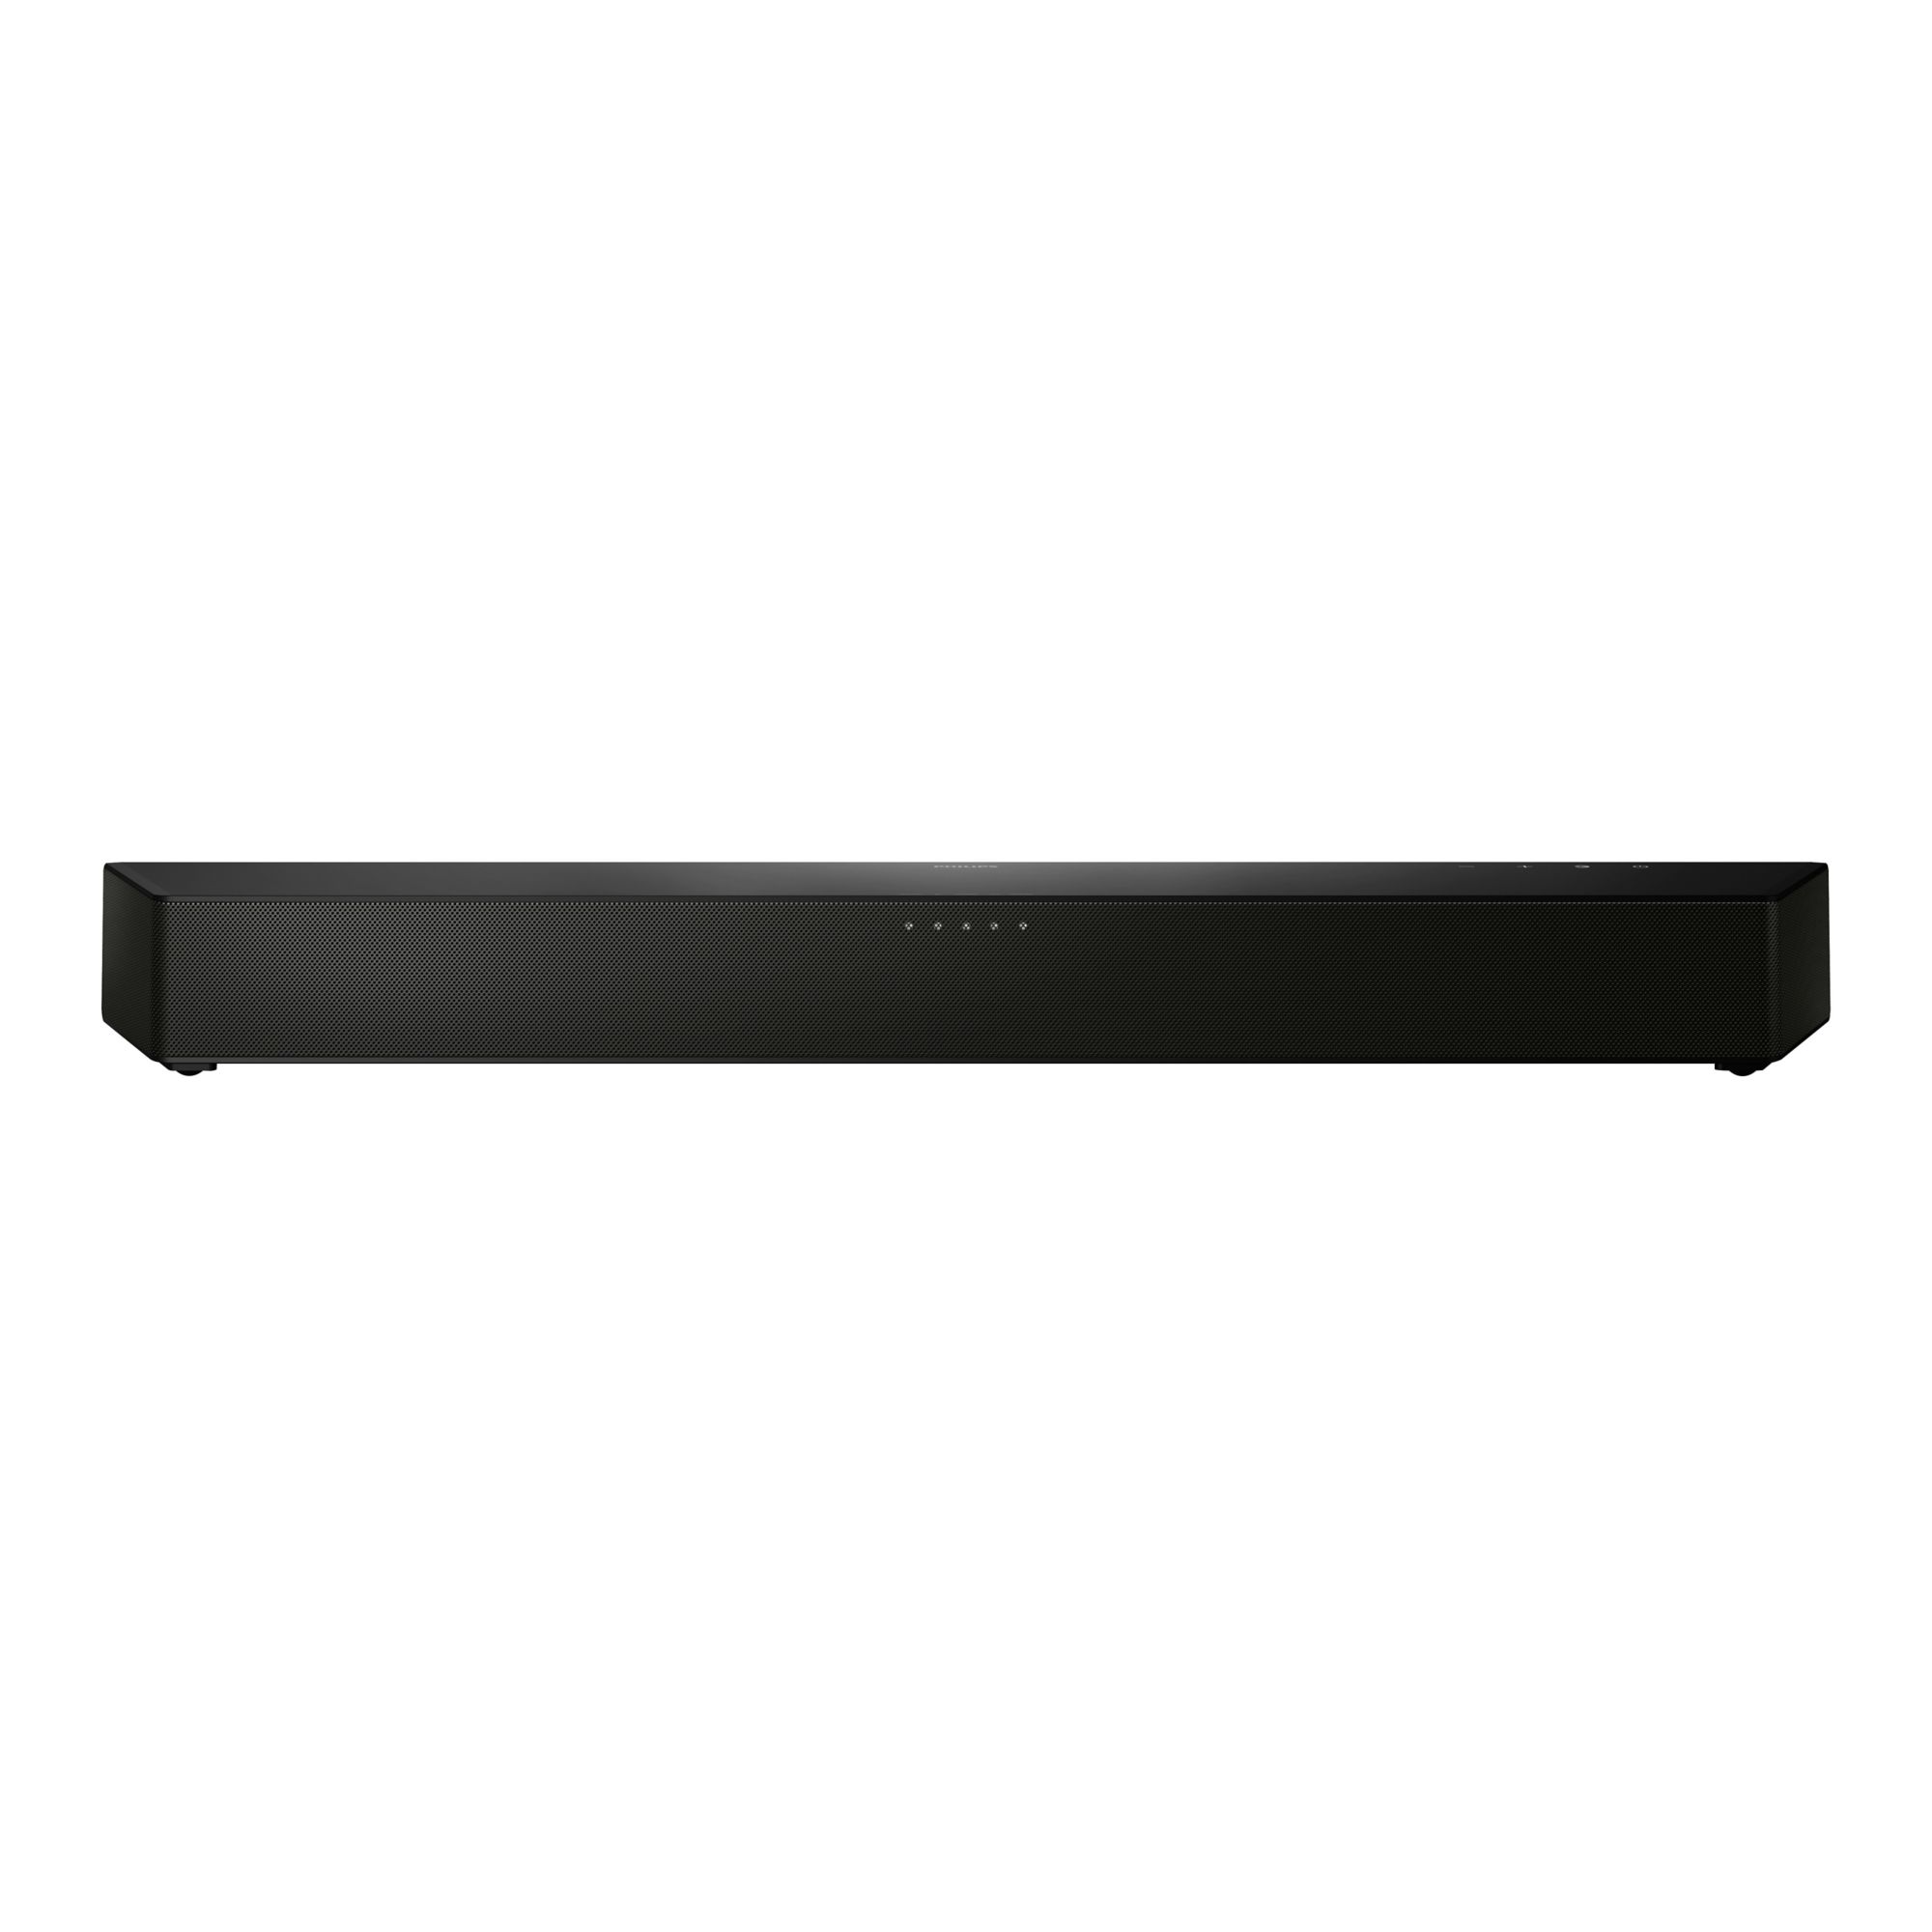 Philips B5706 2.1 Channel Soundbar with Built-in Subwoofer